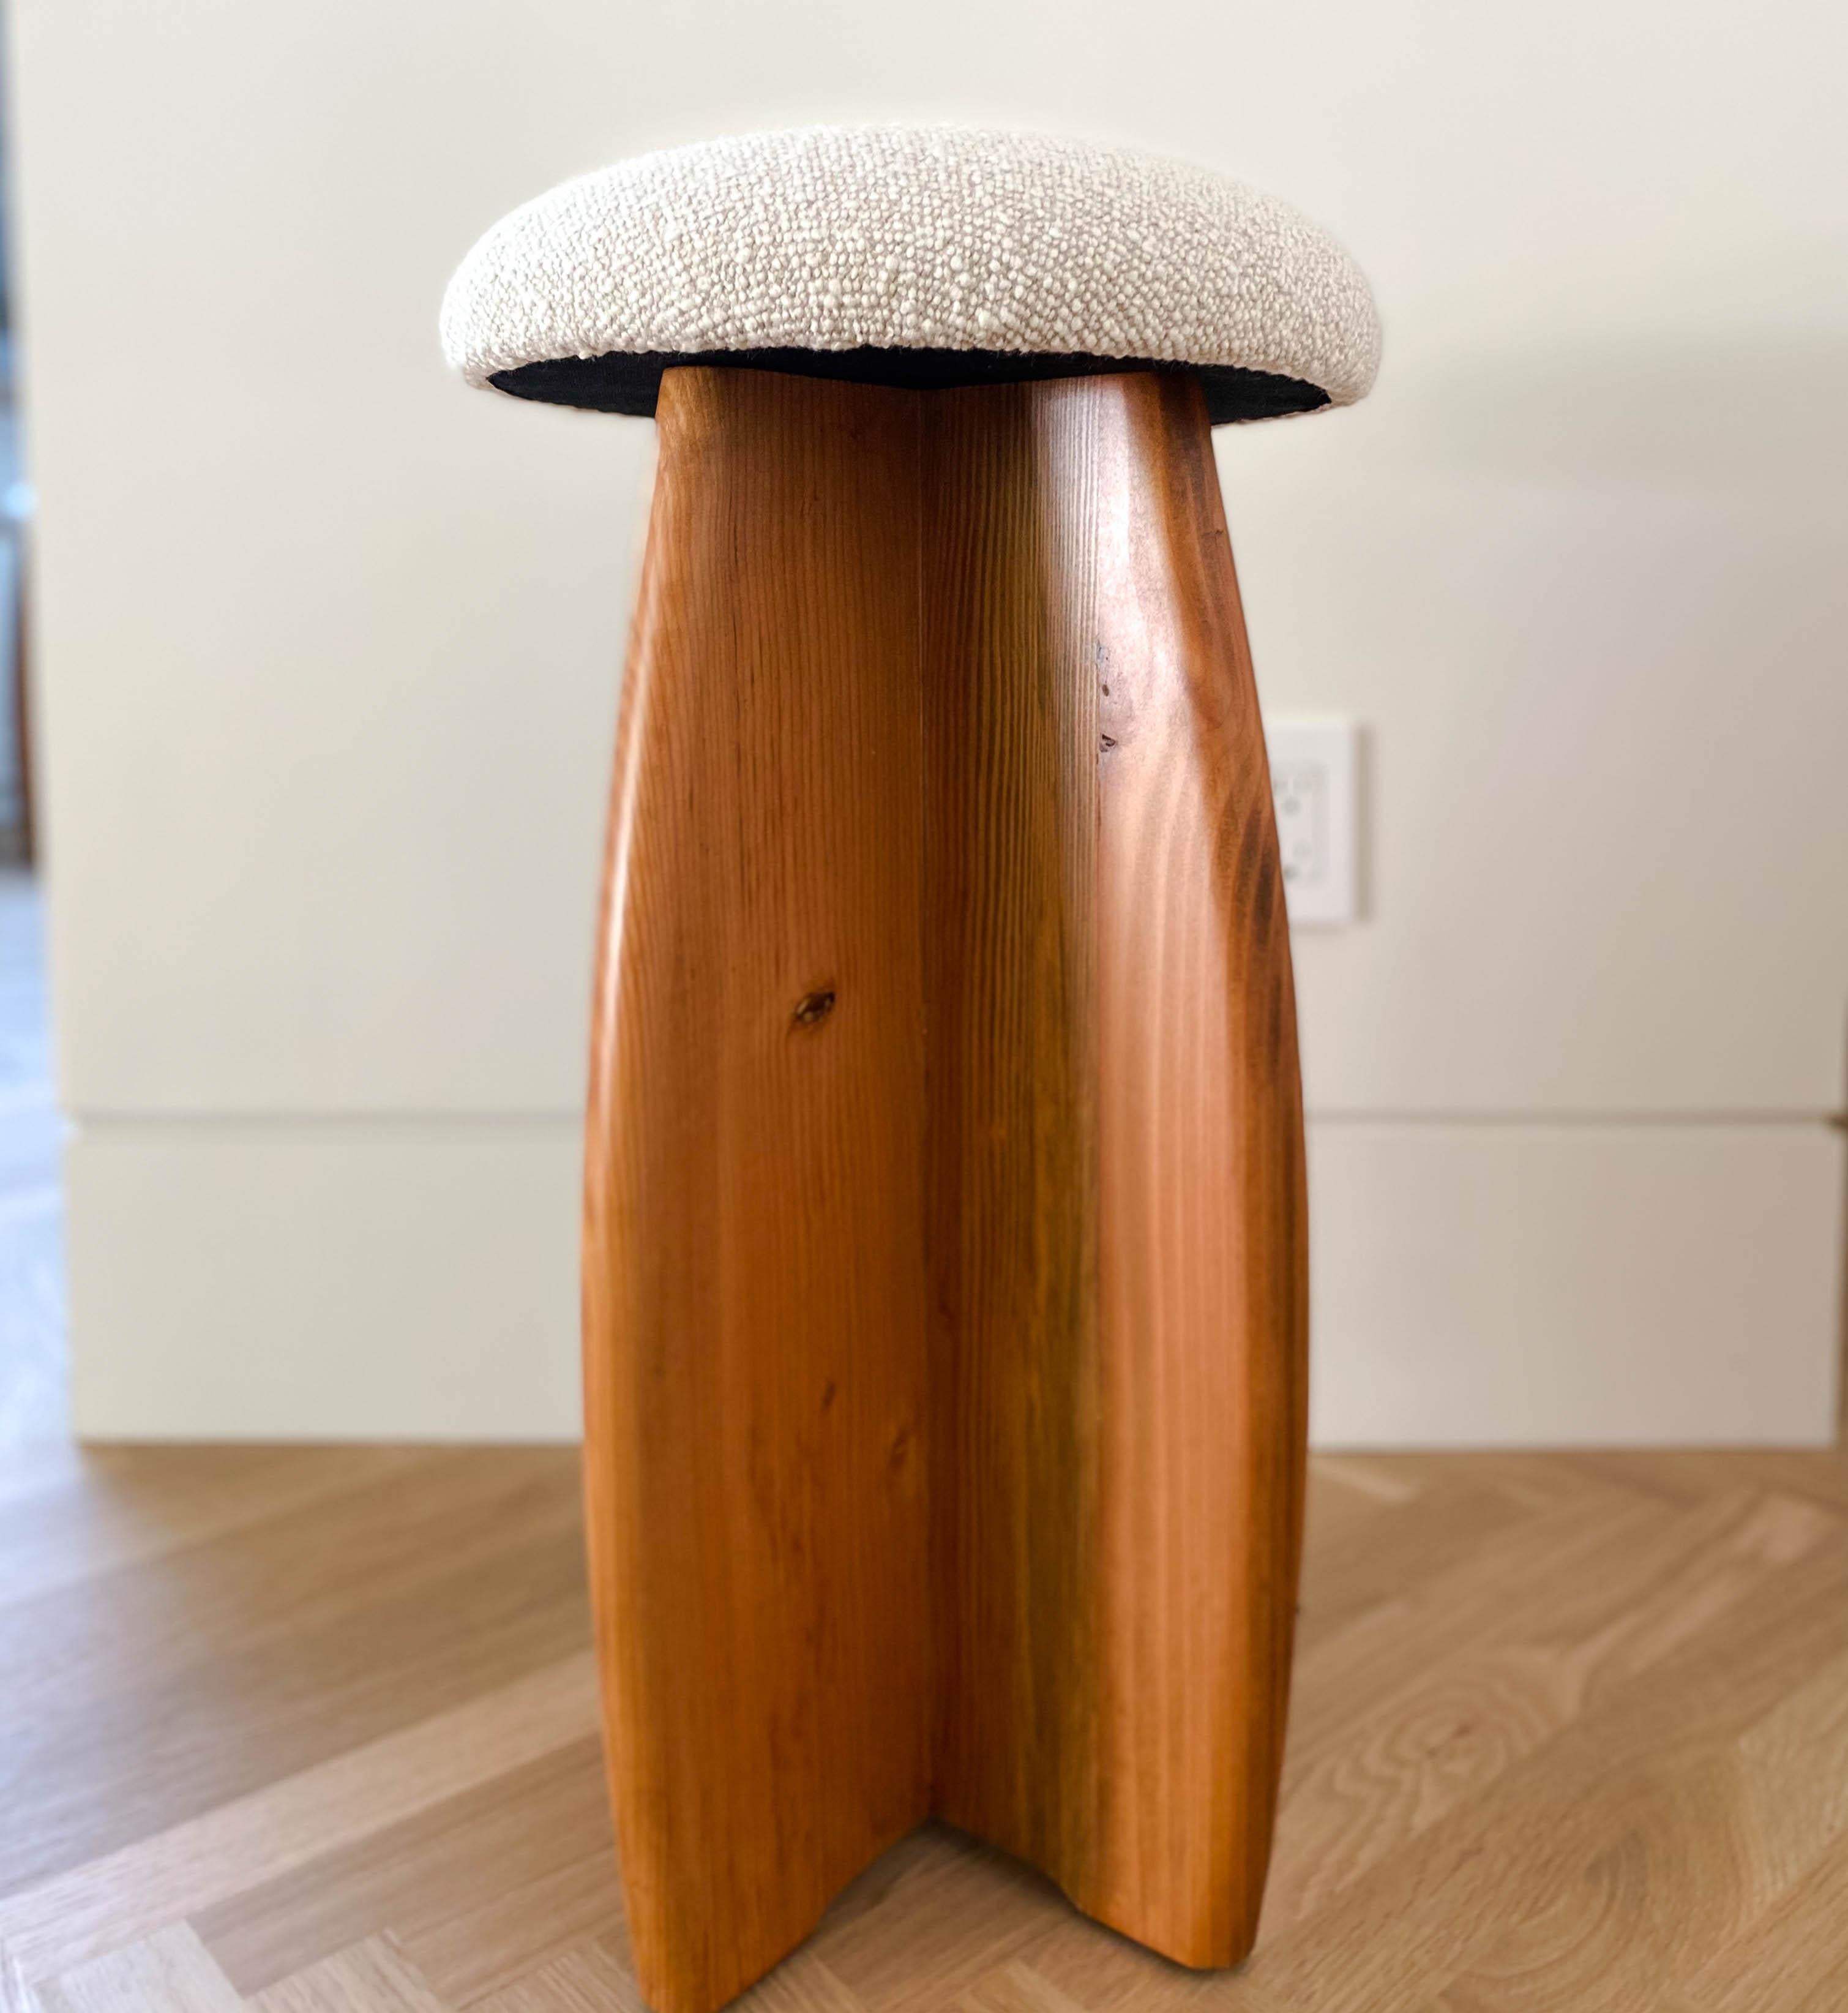 Custom studio Osklo stool 1 - counter height in knotty pine, 4 available and additional in 4-6 weeks lead time.